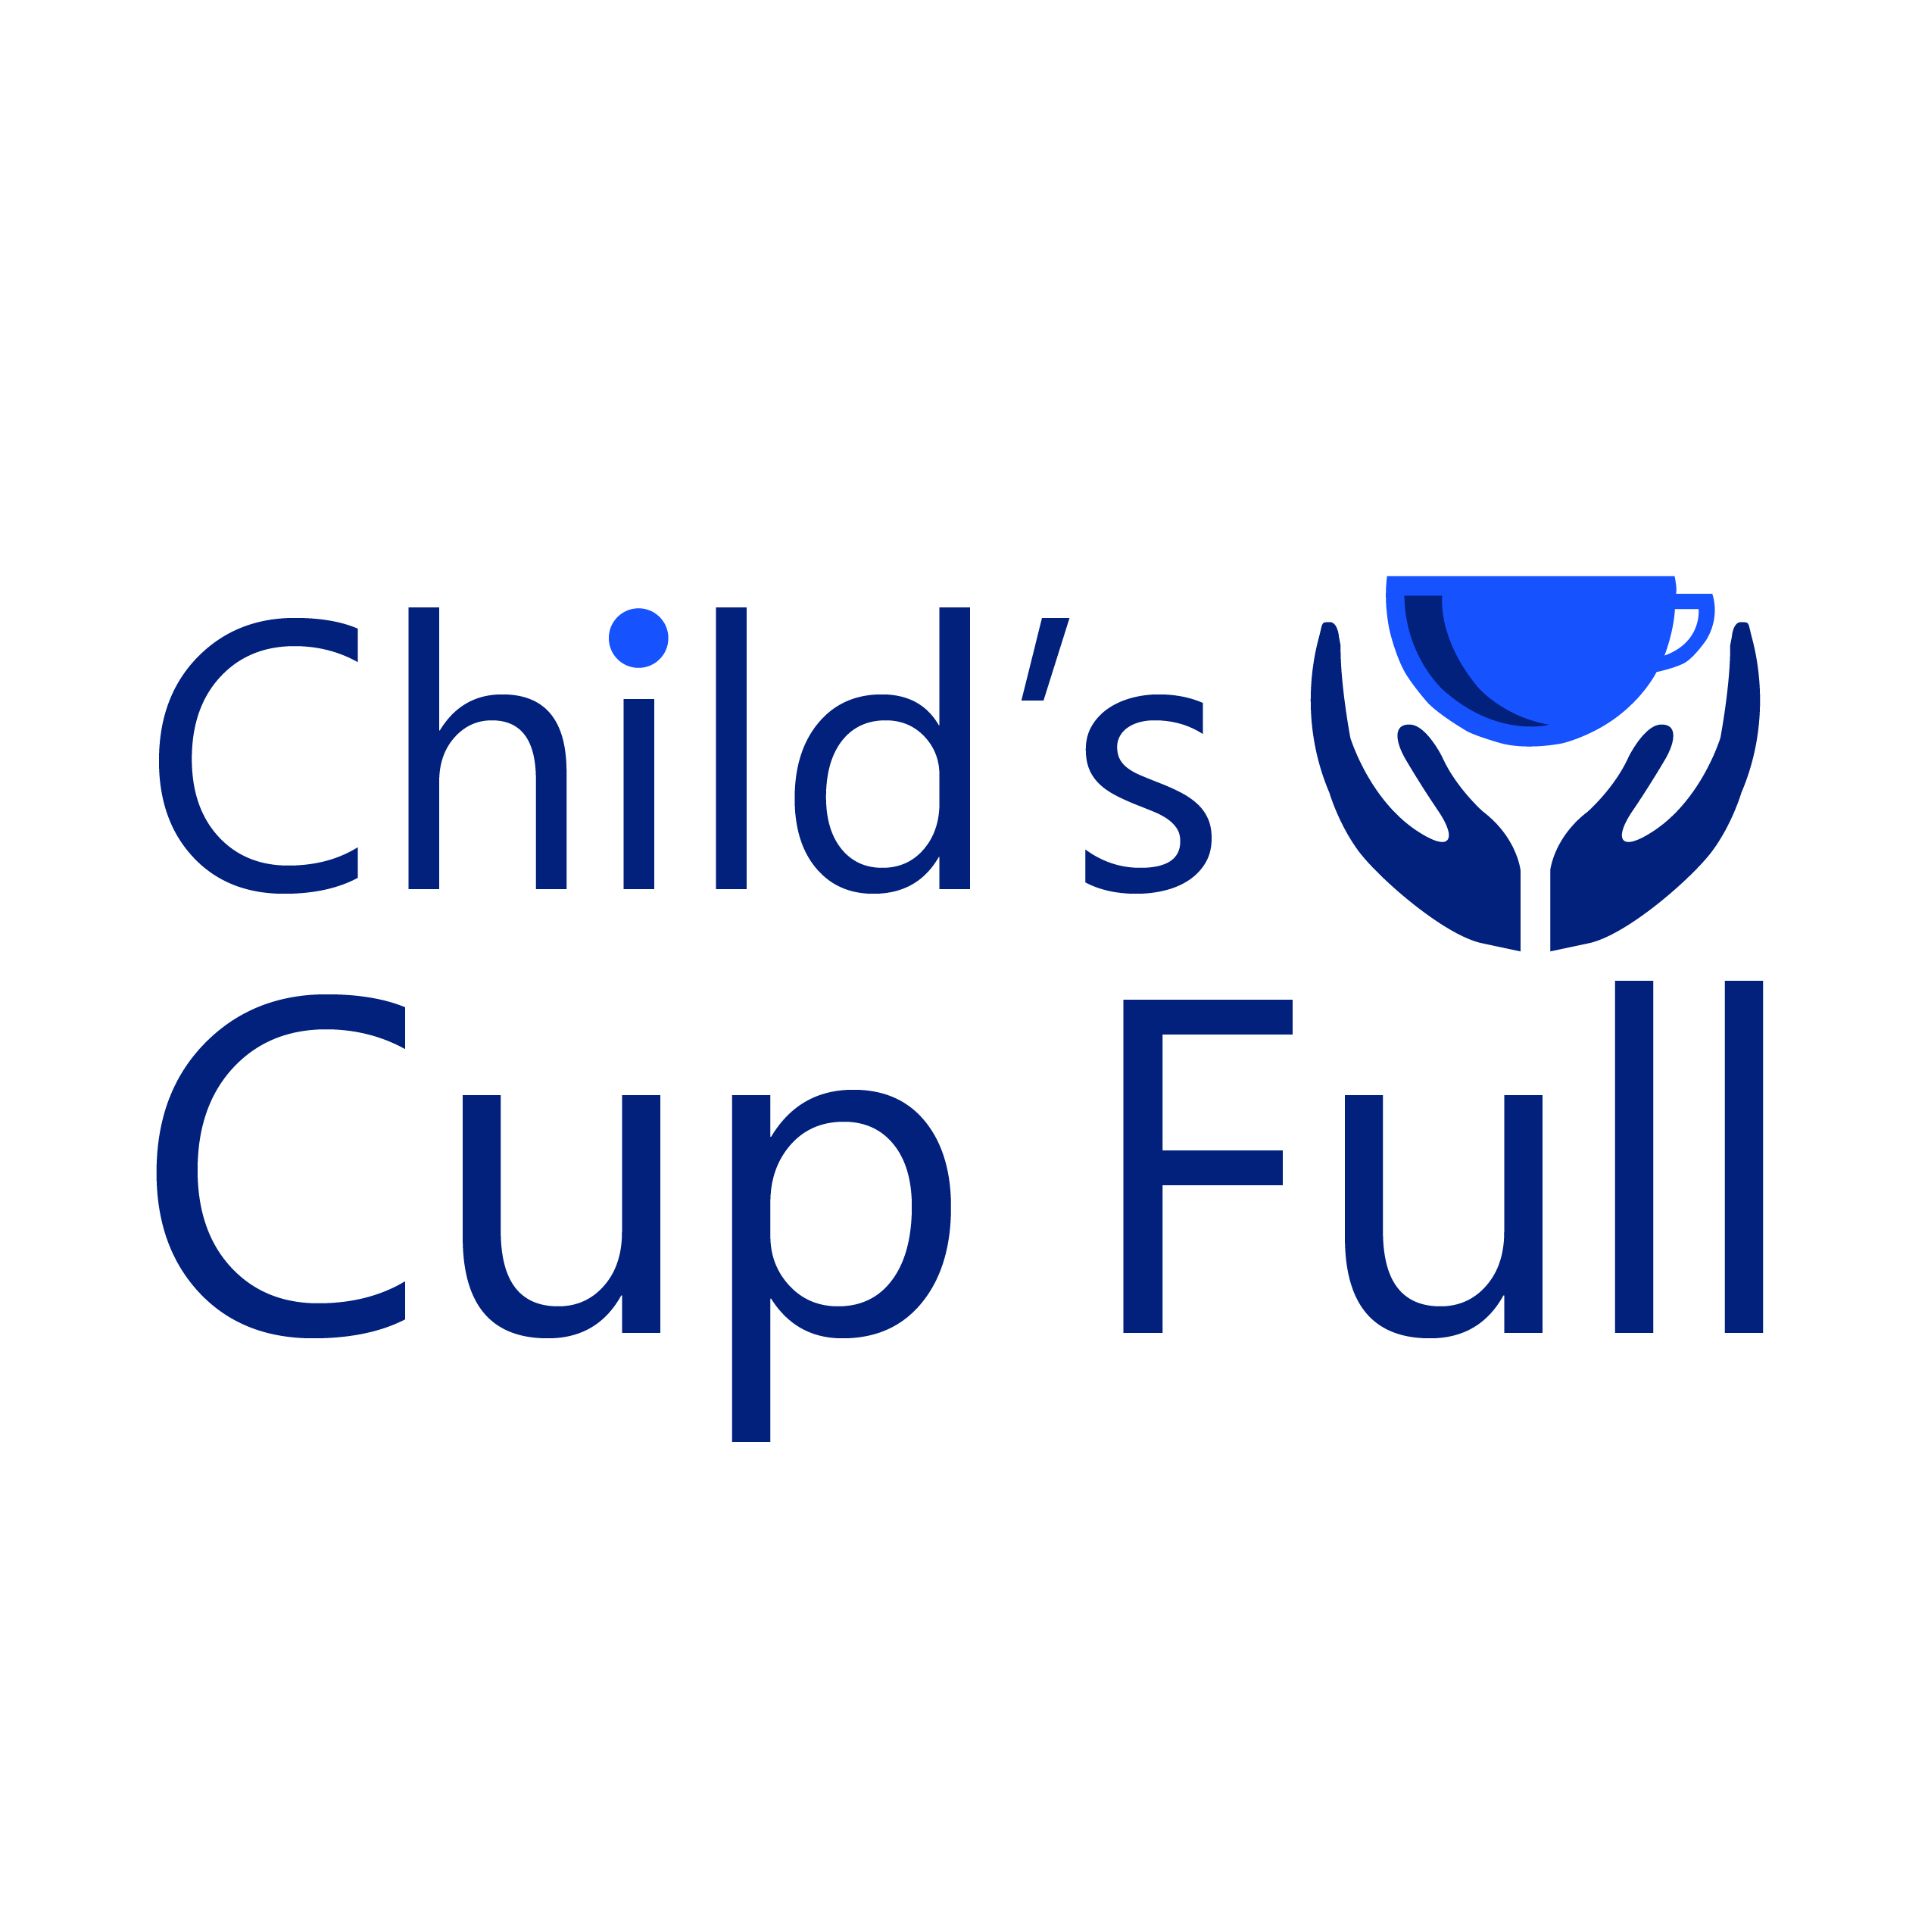 A Child's Cup Full Association